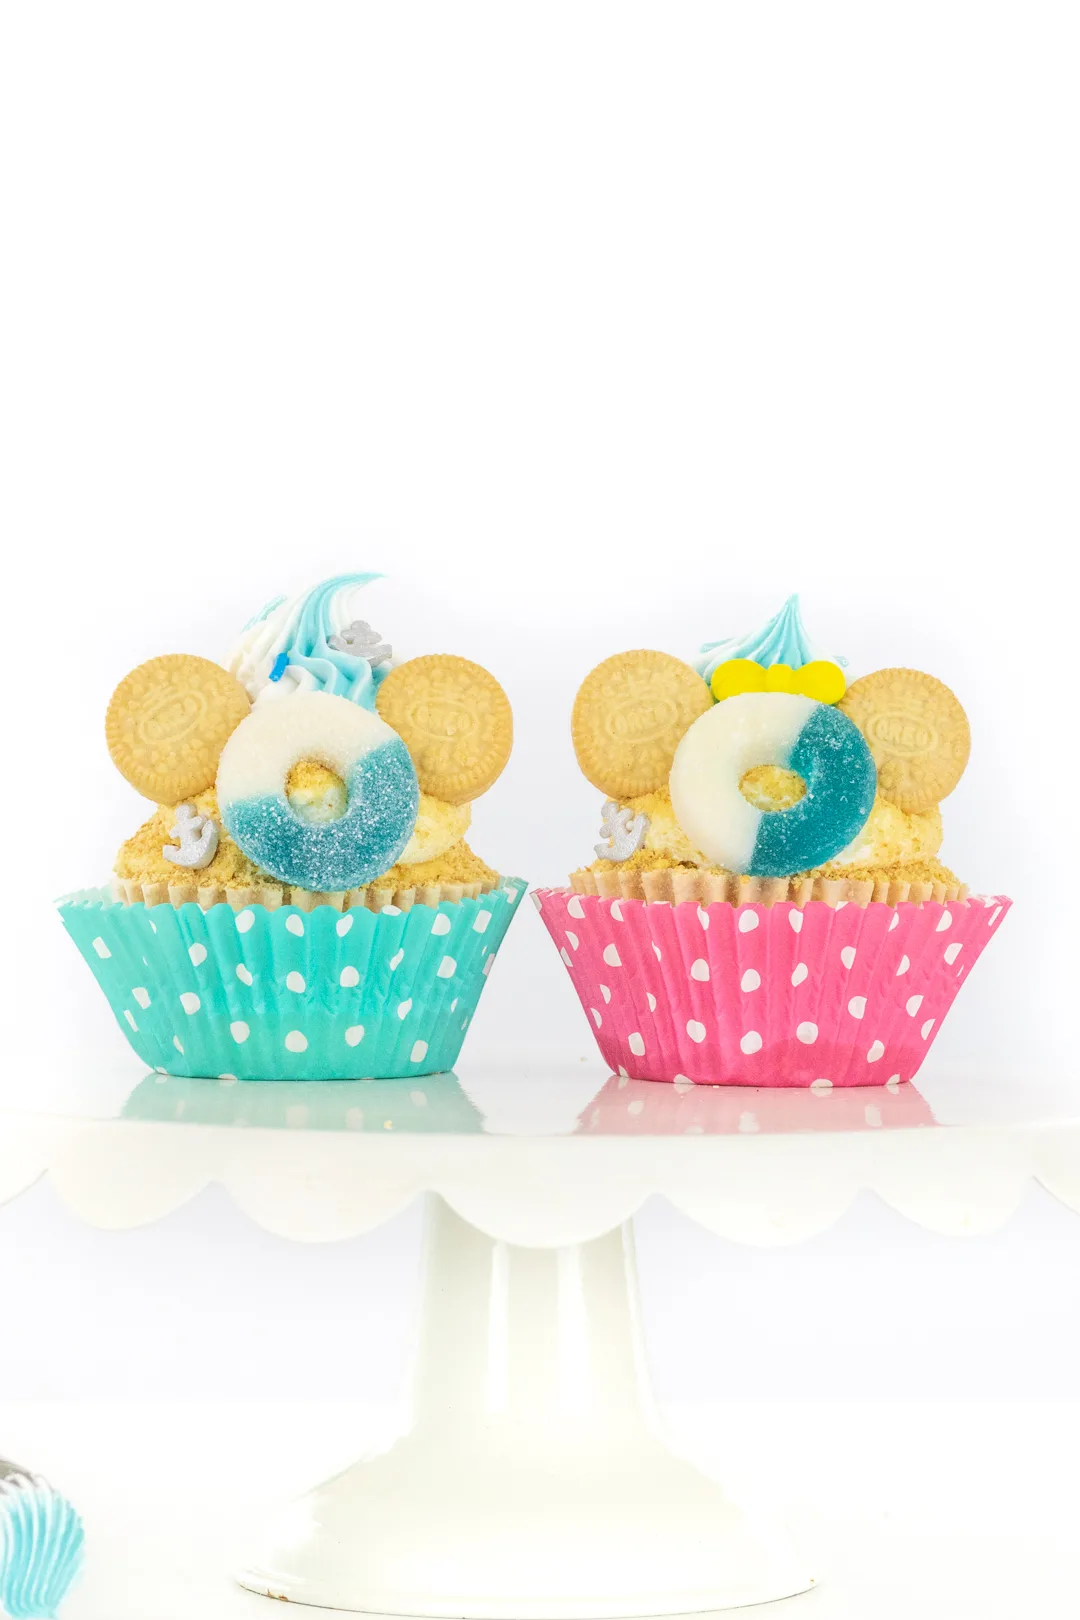 minnie and mickey cupcakes that are inspired by a disney cruise with graham cracker crumbs for sand